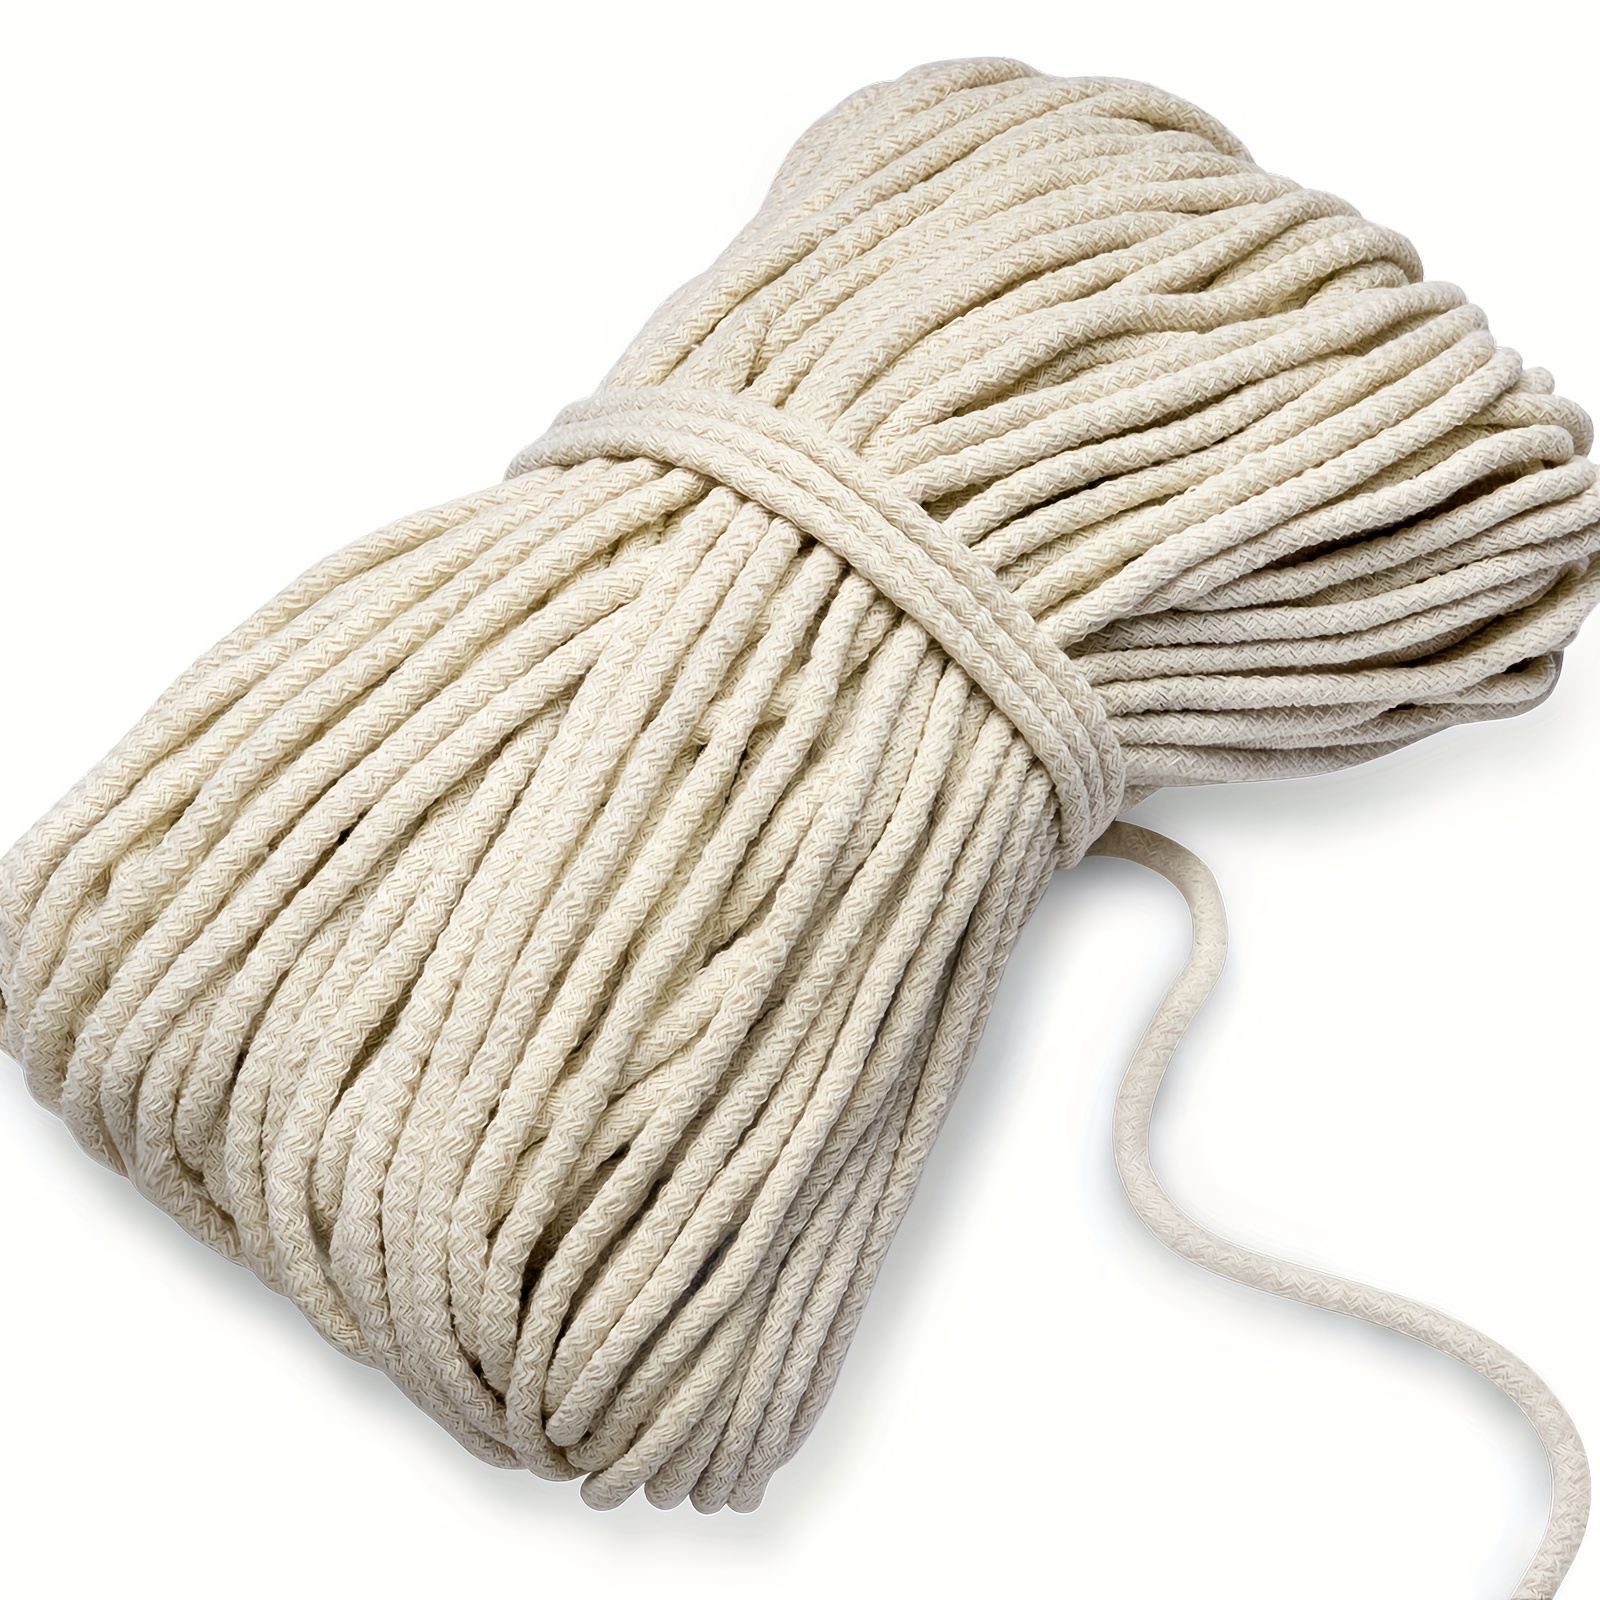 6mm 4724.41inch Cotton Rope For Craft And Daily Use